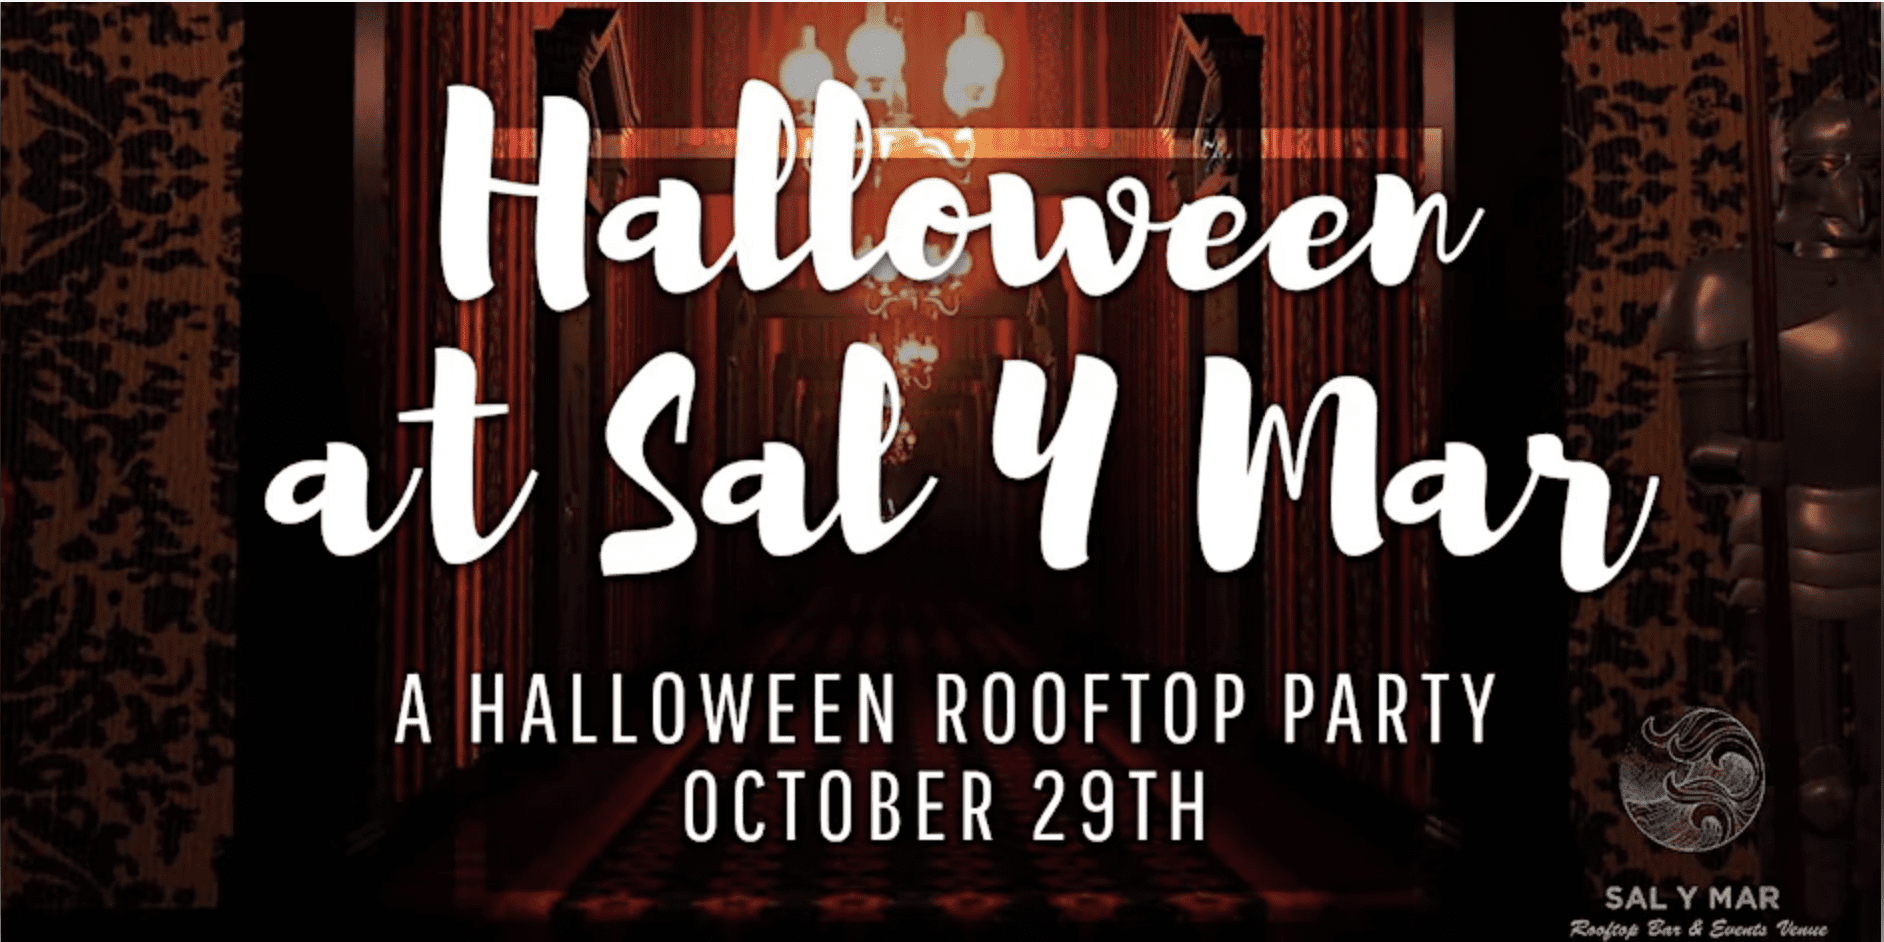 Sal y Mar Halloween Rooftop Party Event